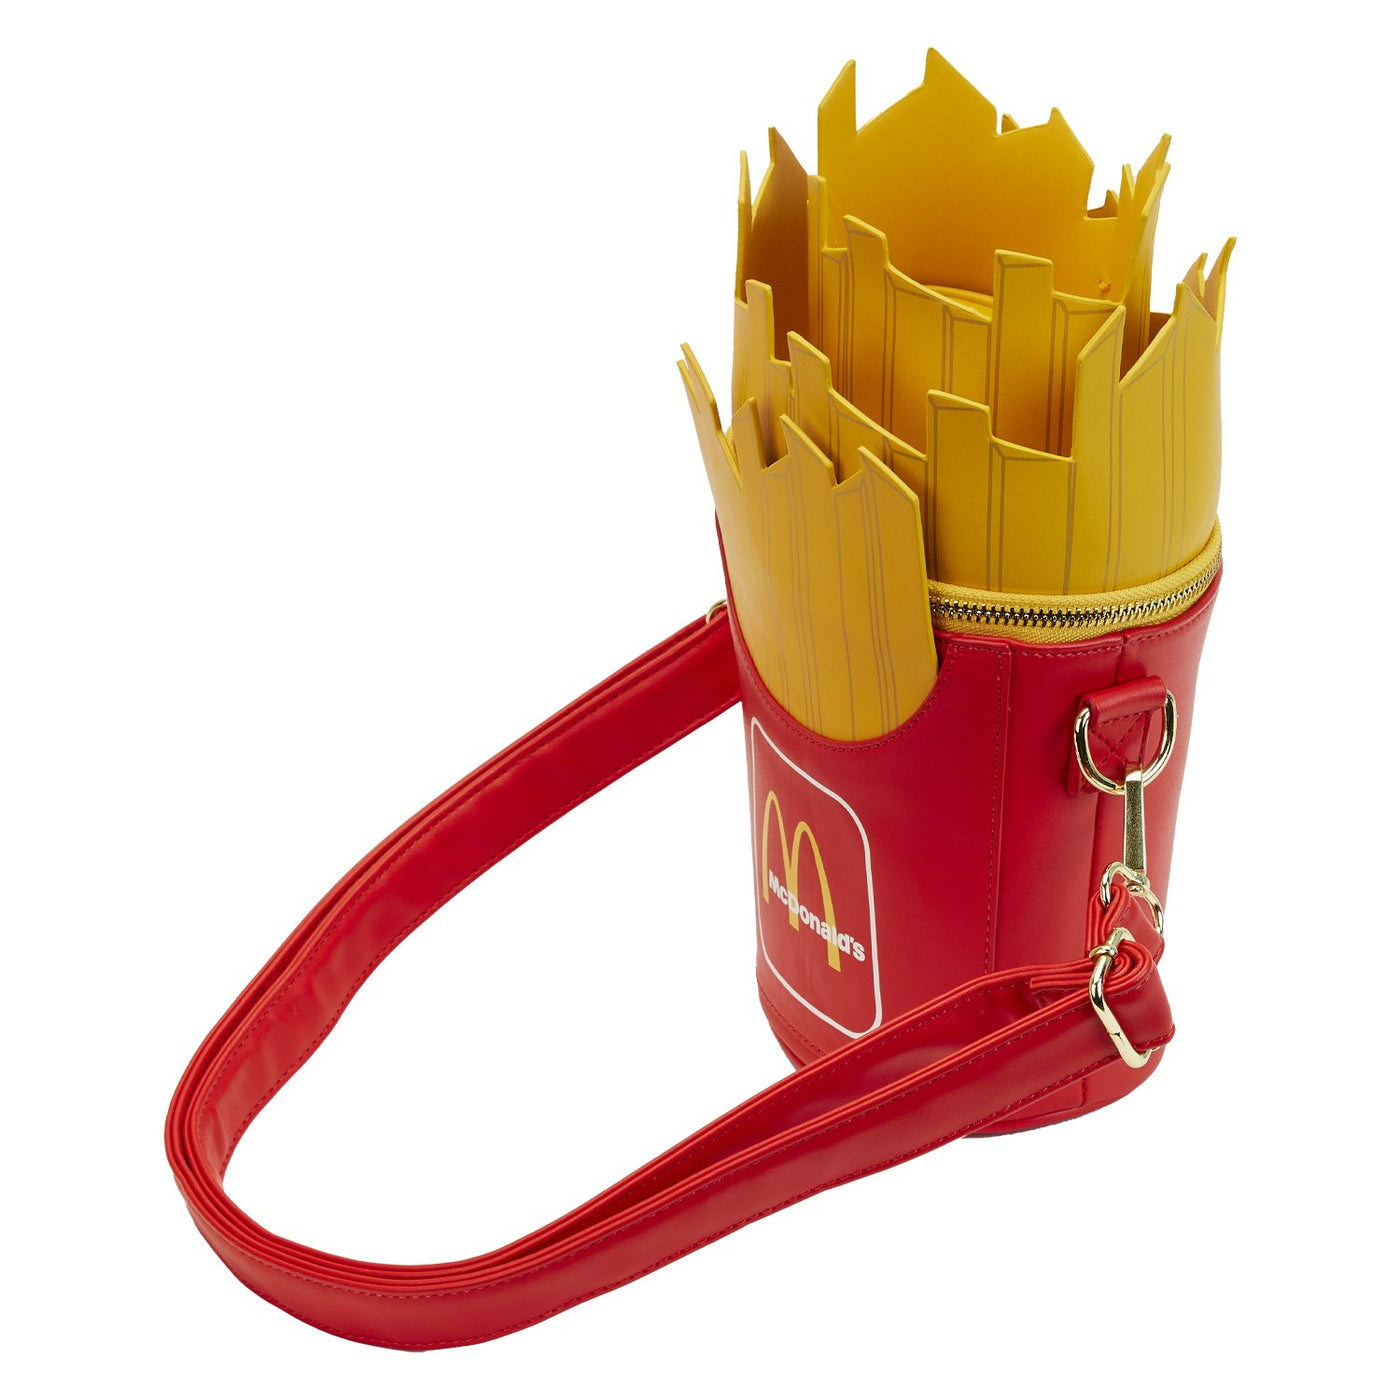 671803452183 - Loungefly McDonald's French Fries Crossbody - Left Side